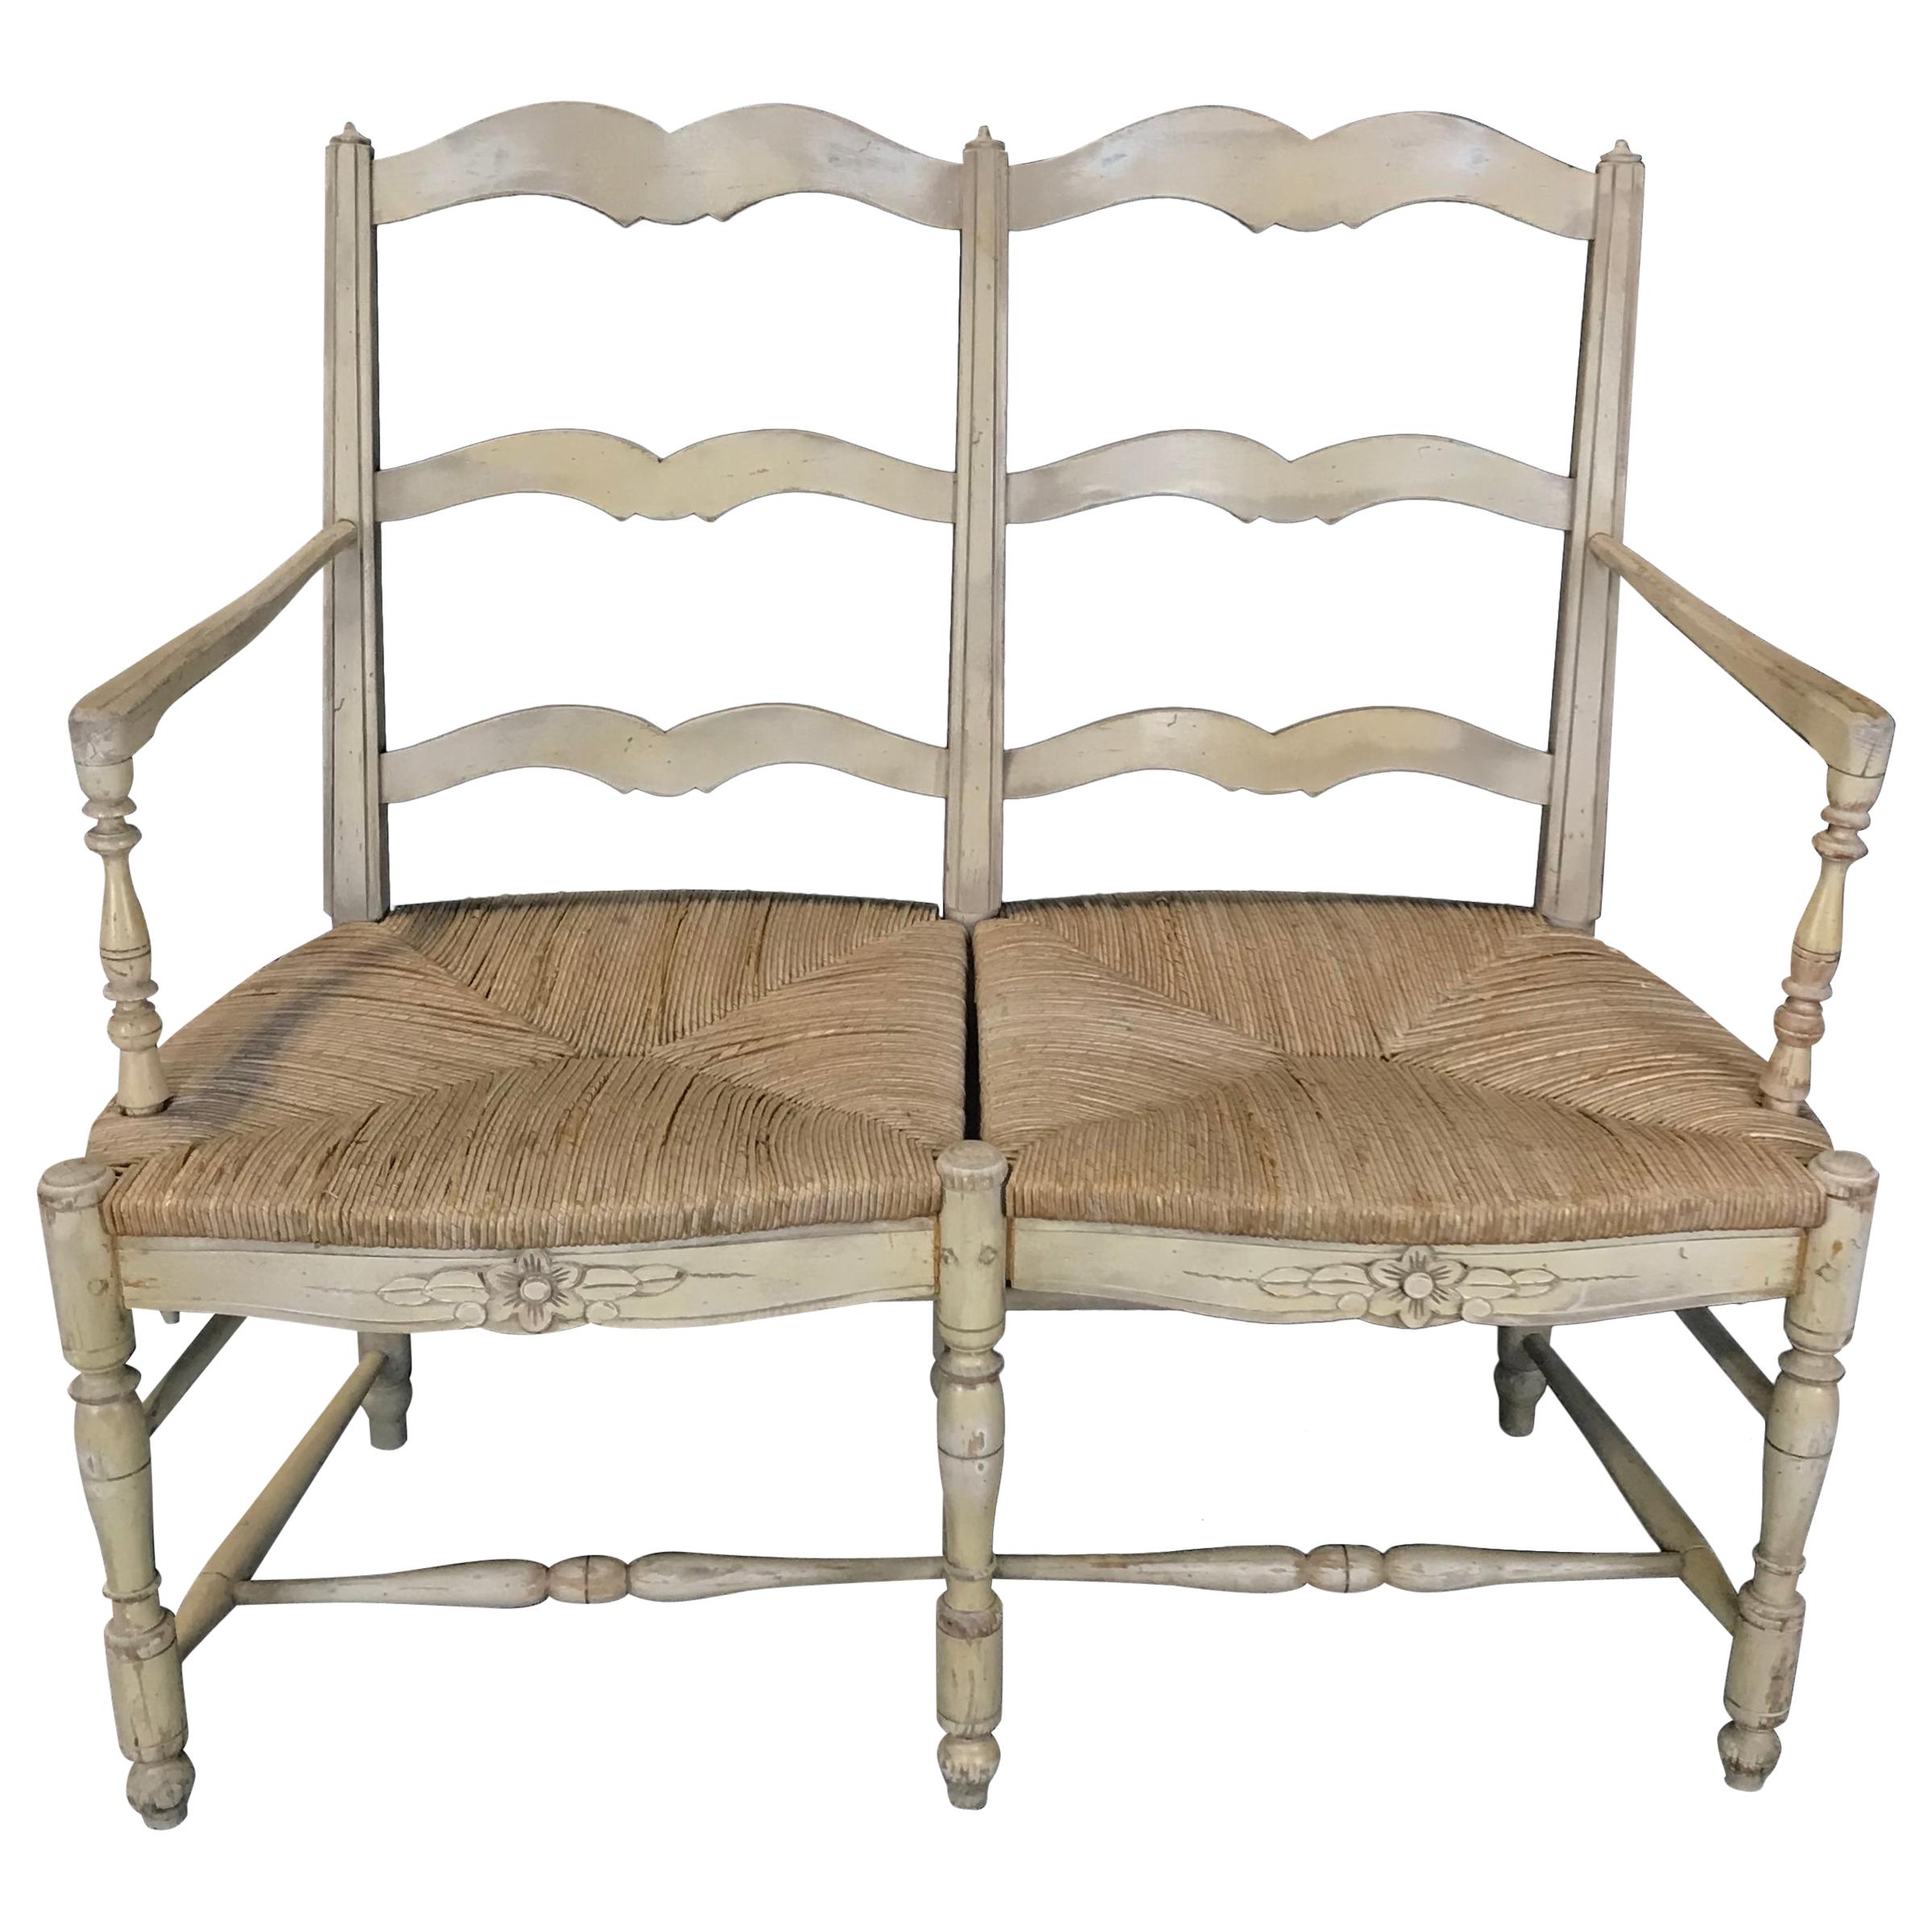 Charming Antique French Country Bench Loveseat Sofa